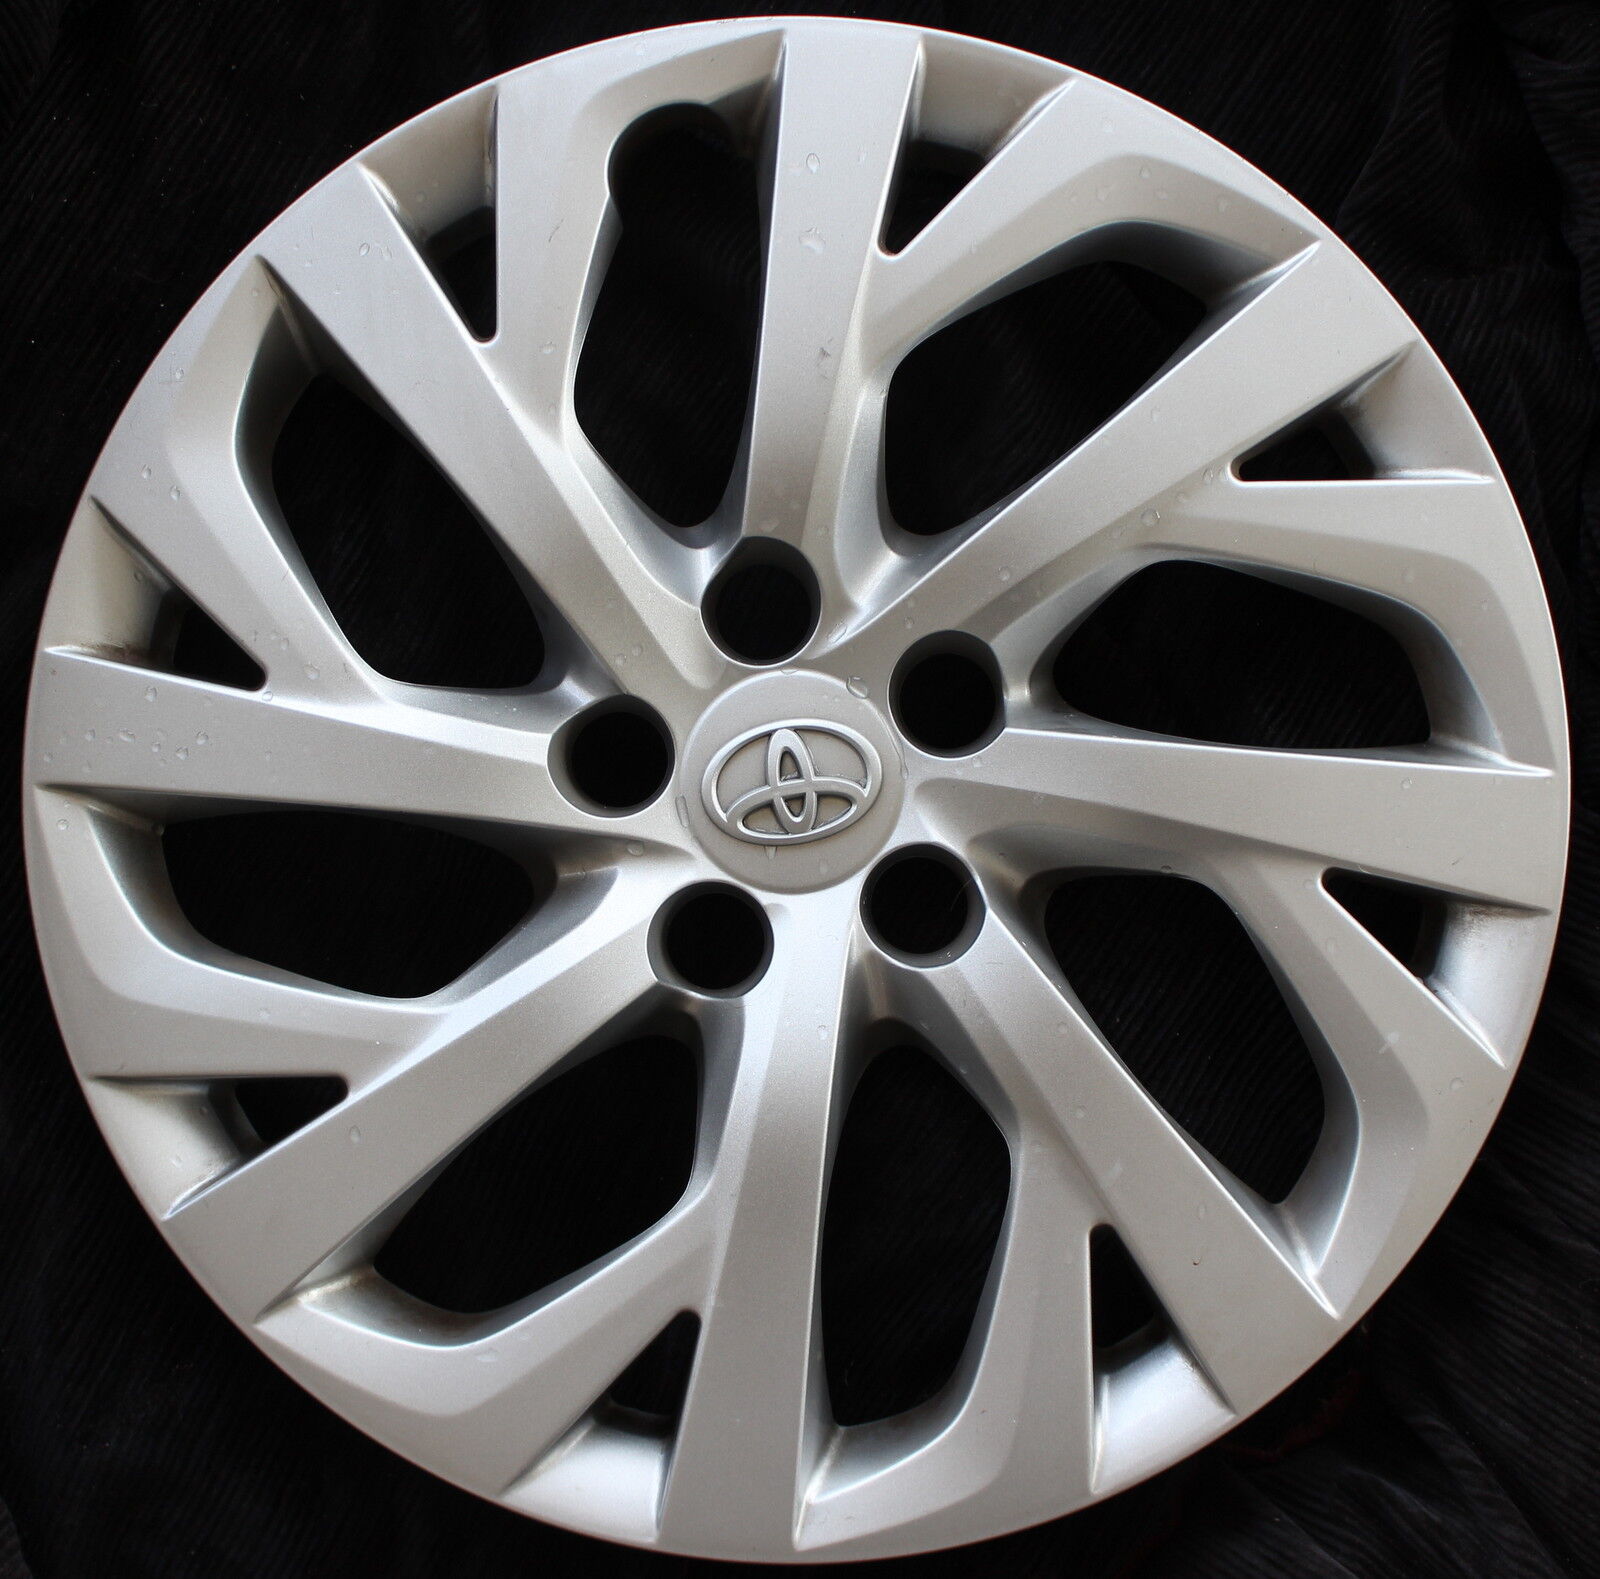 Genuine Made by Toyota Corolla Hubcap OEM Cover 2017 2018 2019 16\